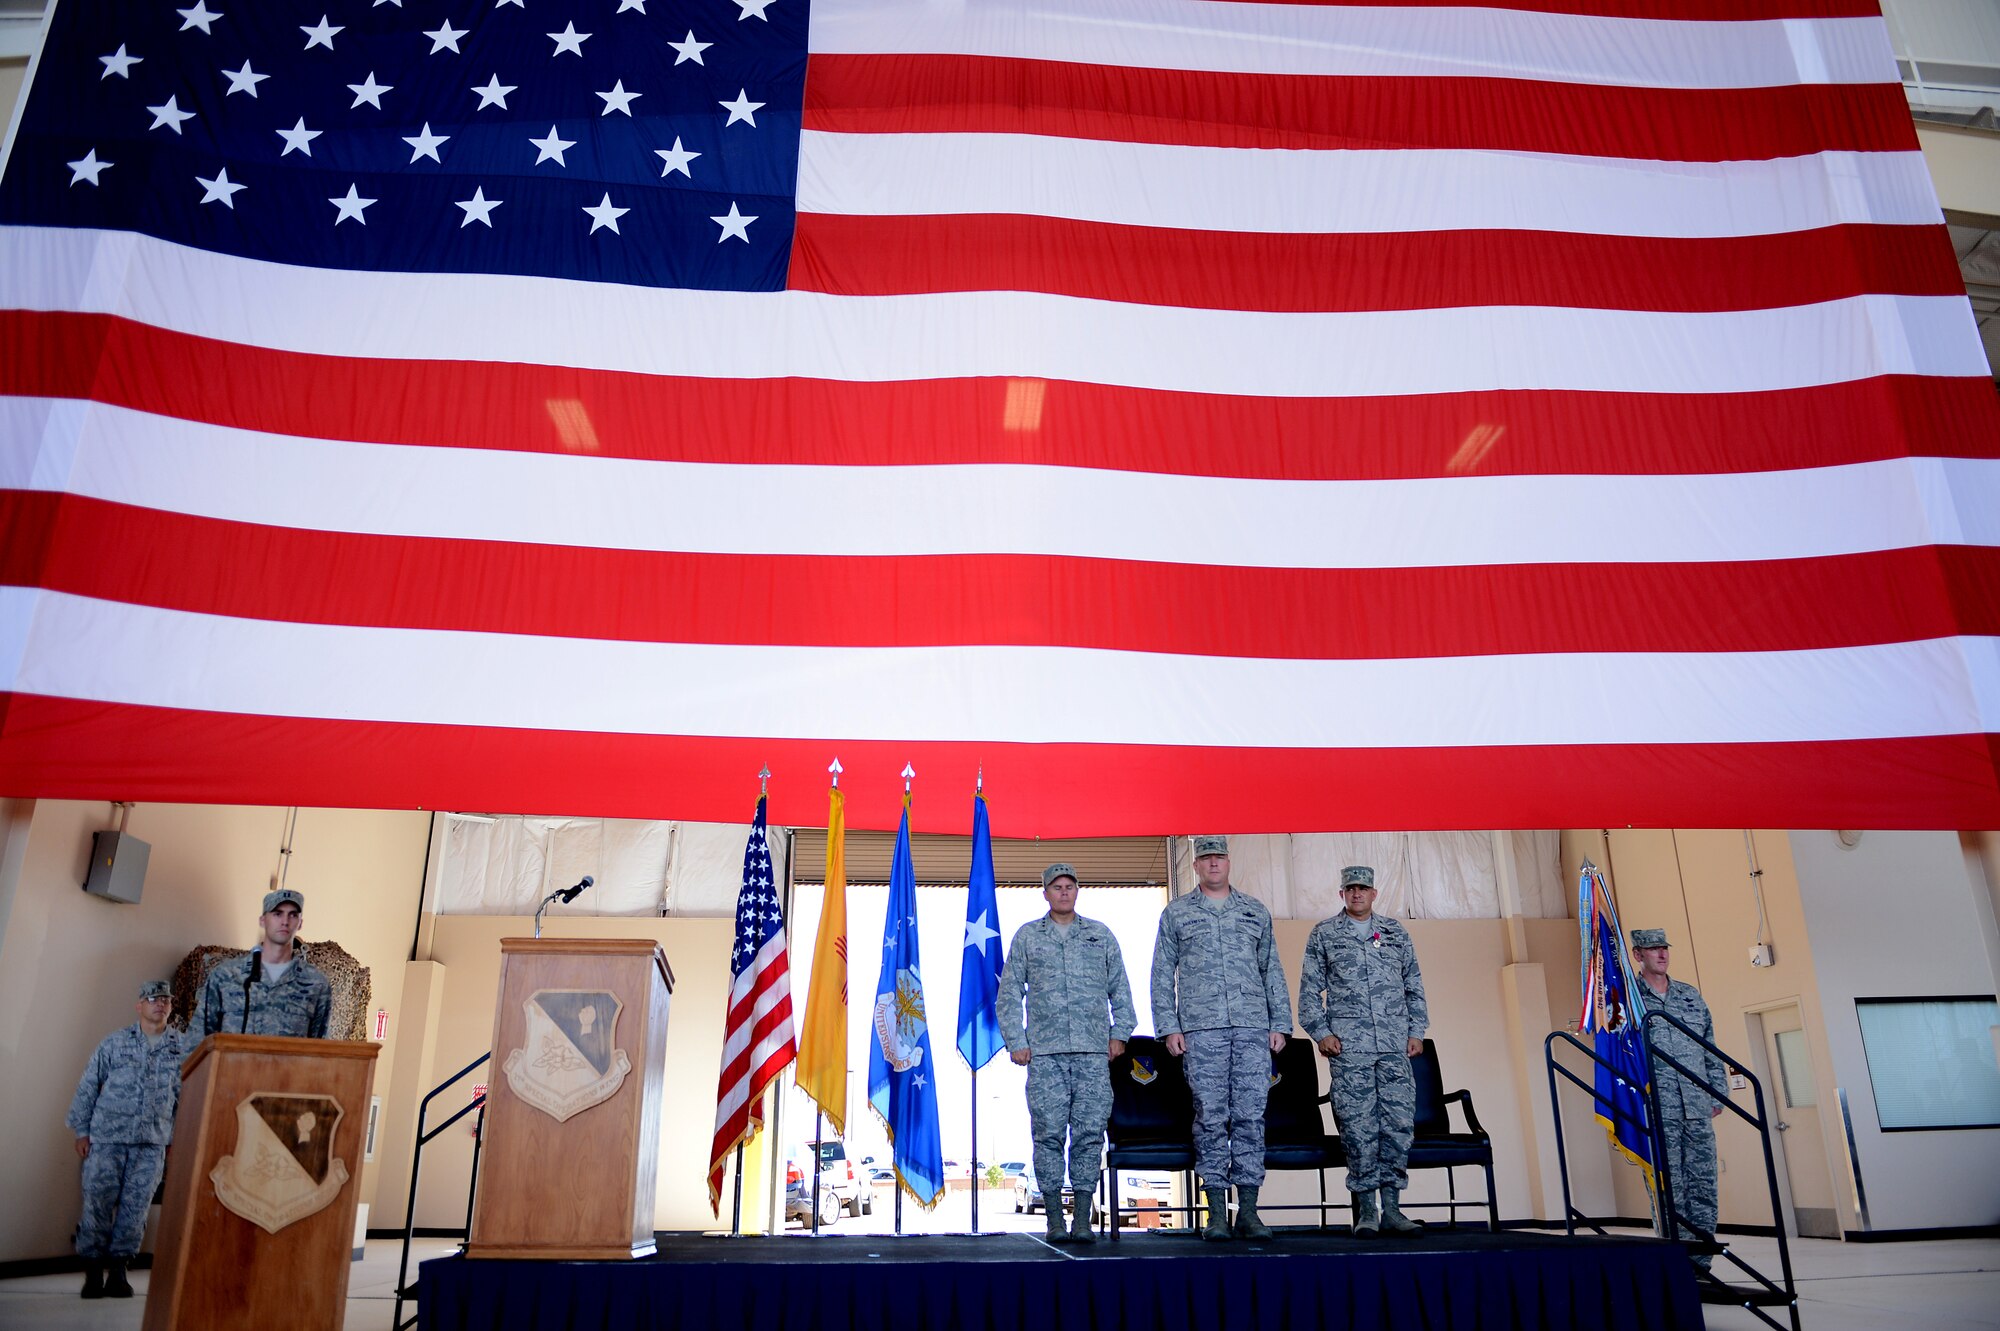 U.S. Air Force Lt. Gen. Eric Fiel, Air Force Special Operations Command commander, Col. Tony Bauernfeind, 27th Special Operations Wing commander, and Brig. Gen. Buck Elton, 27 SOW relinquishing commander, stand at attention during a change of command ceremony July 23, 2013, at Cannon Air Force Base, N.M.  Bauernfeind succeeded Elton, who led the wing since July 2011.  (U.S. Air Force photo/Staff Sgt. Matthew Plew)